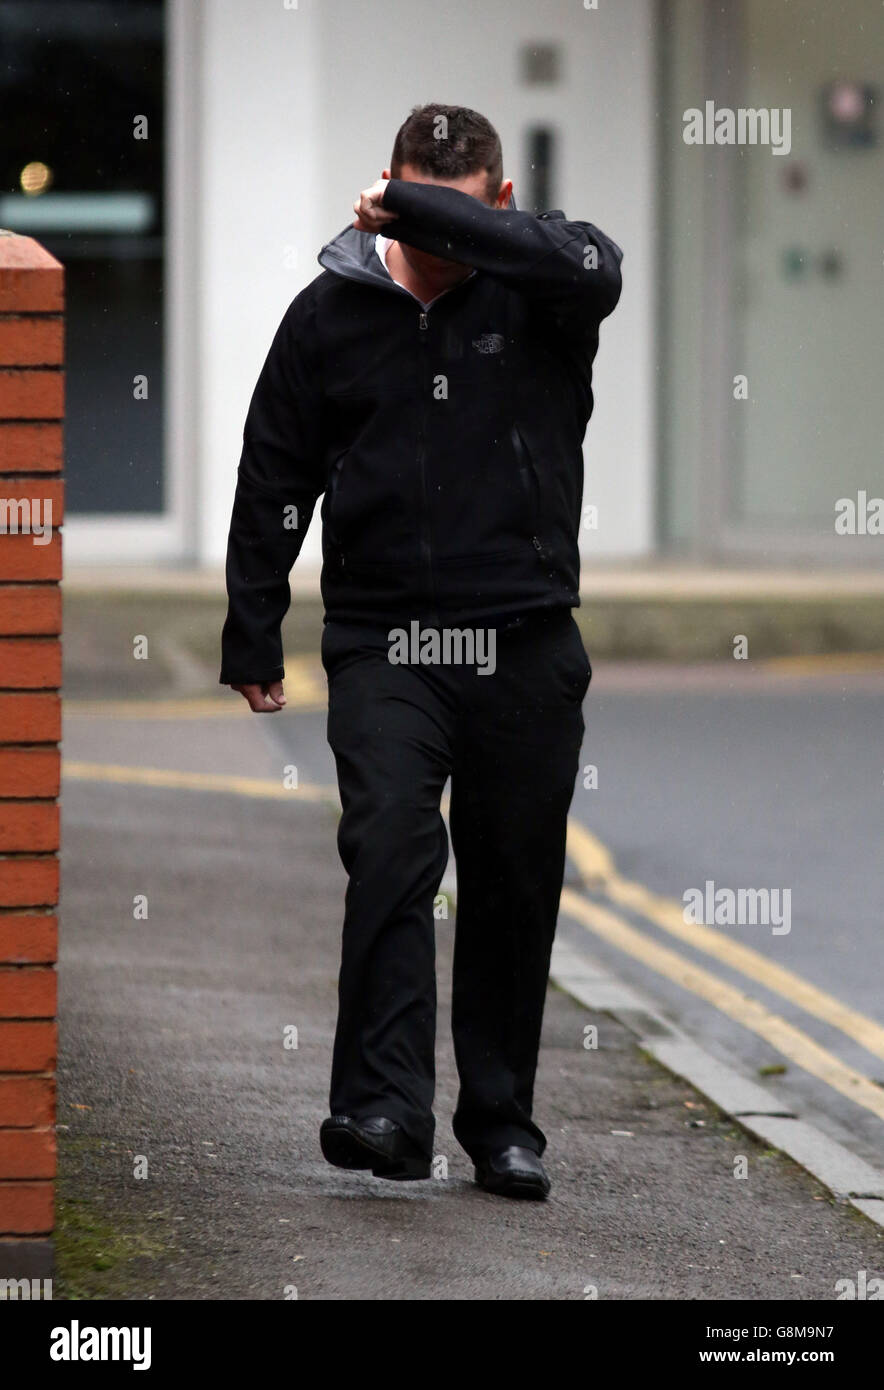 Dean Goble covers his face as he arrives at Swindon Crown Court, where he is accused of deliberately driving head-on at three cyclists to either force them off the road or 'scare the living daylights' out of them. Stock Photo